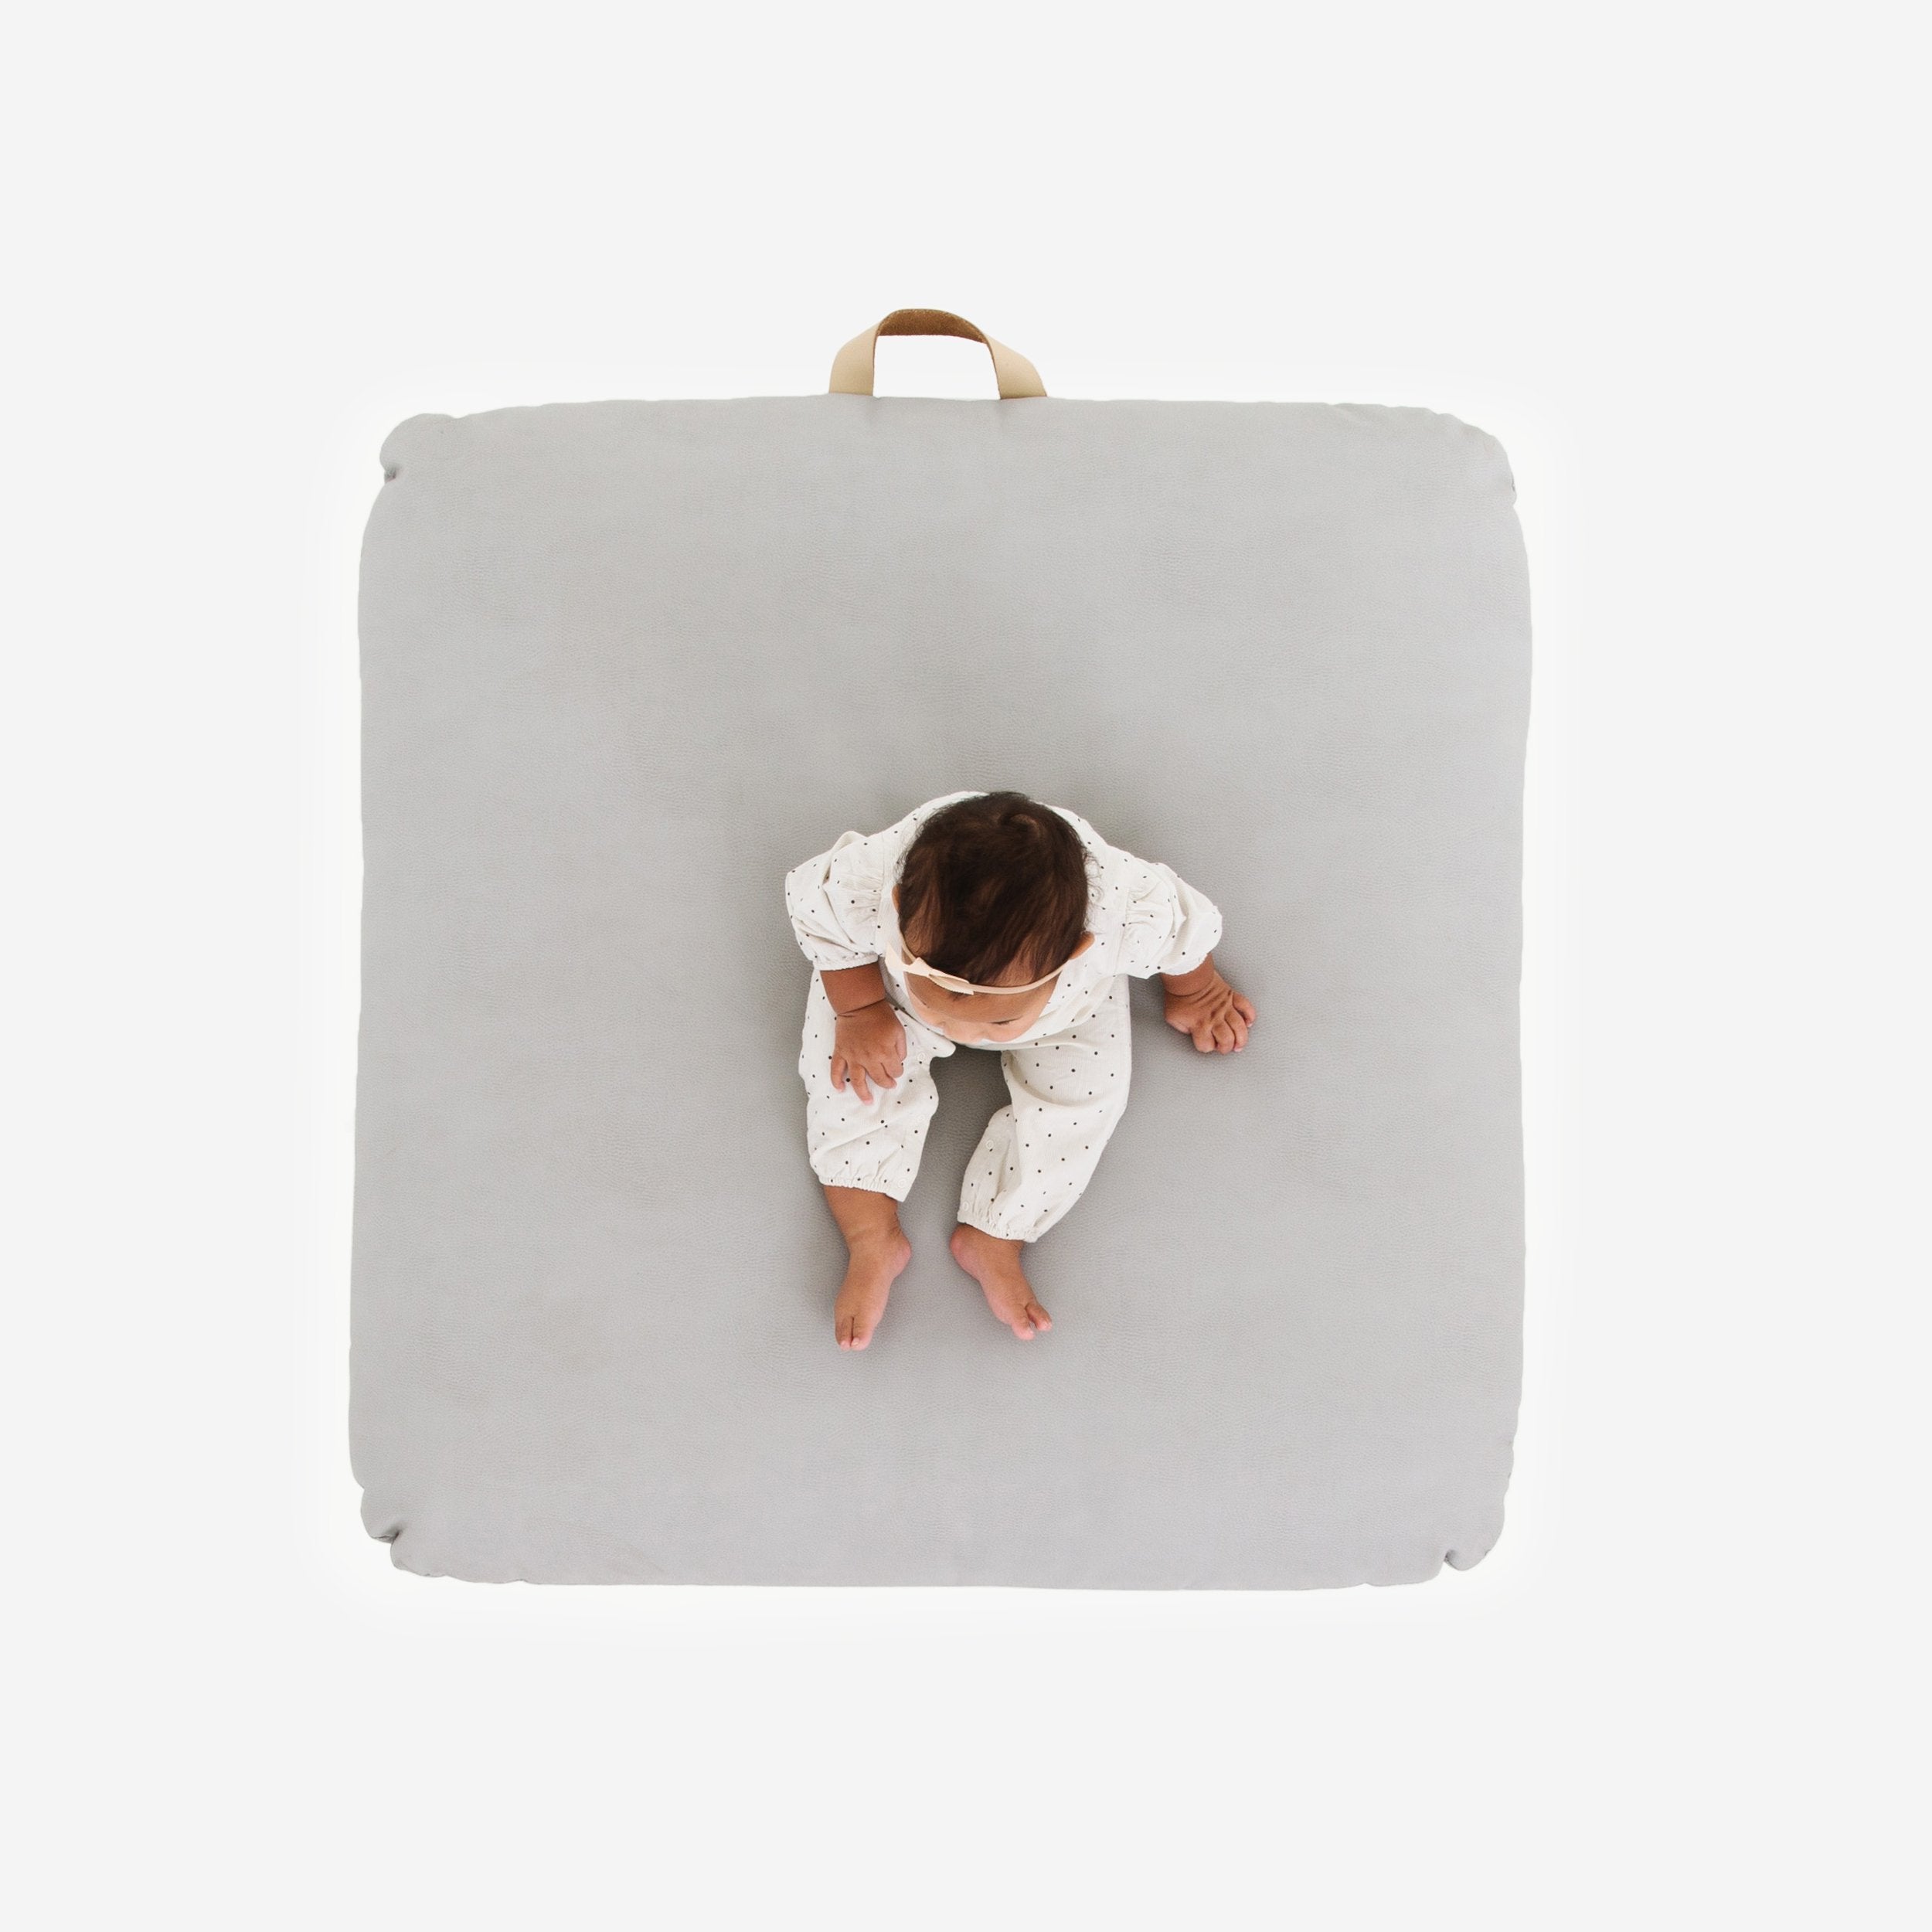 Pewter (on sale) / Square@Overhead of kid sitting on the Pewter Square Floor Cushion